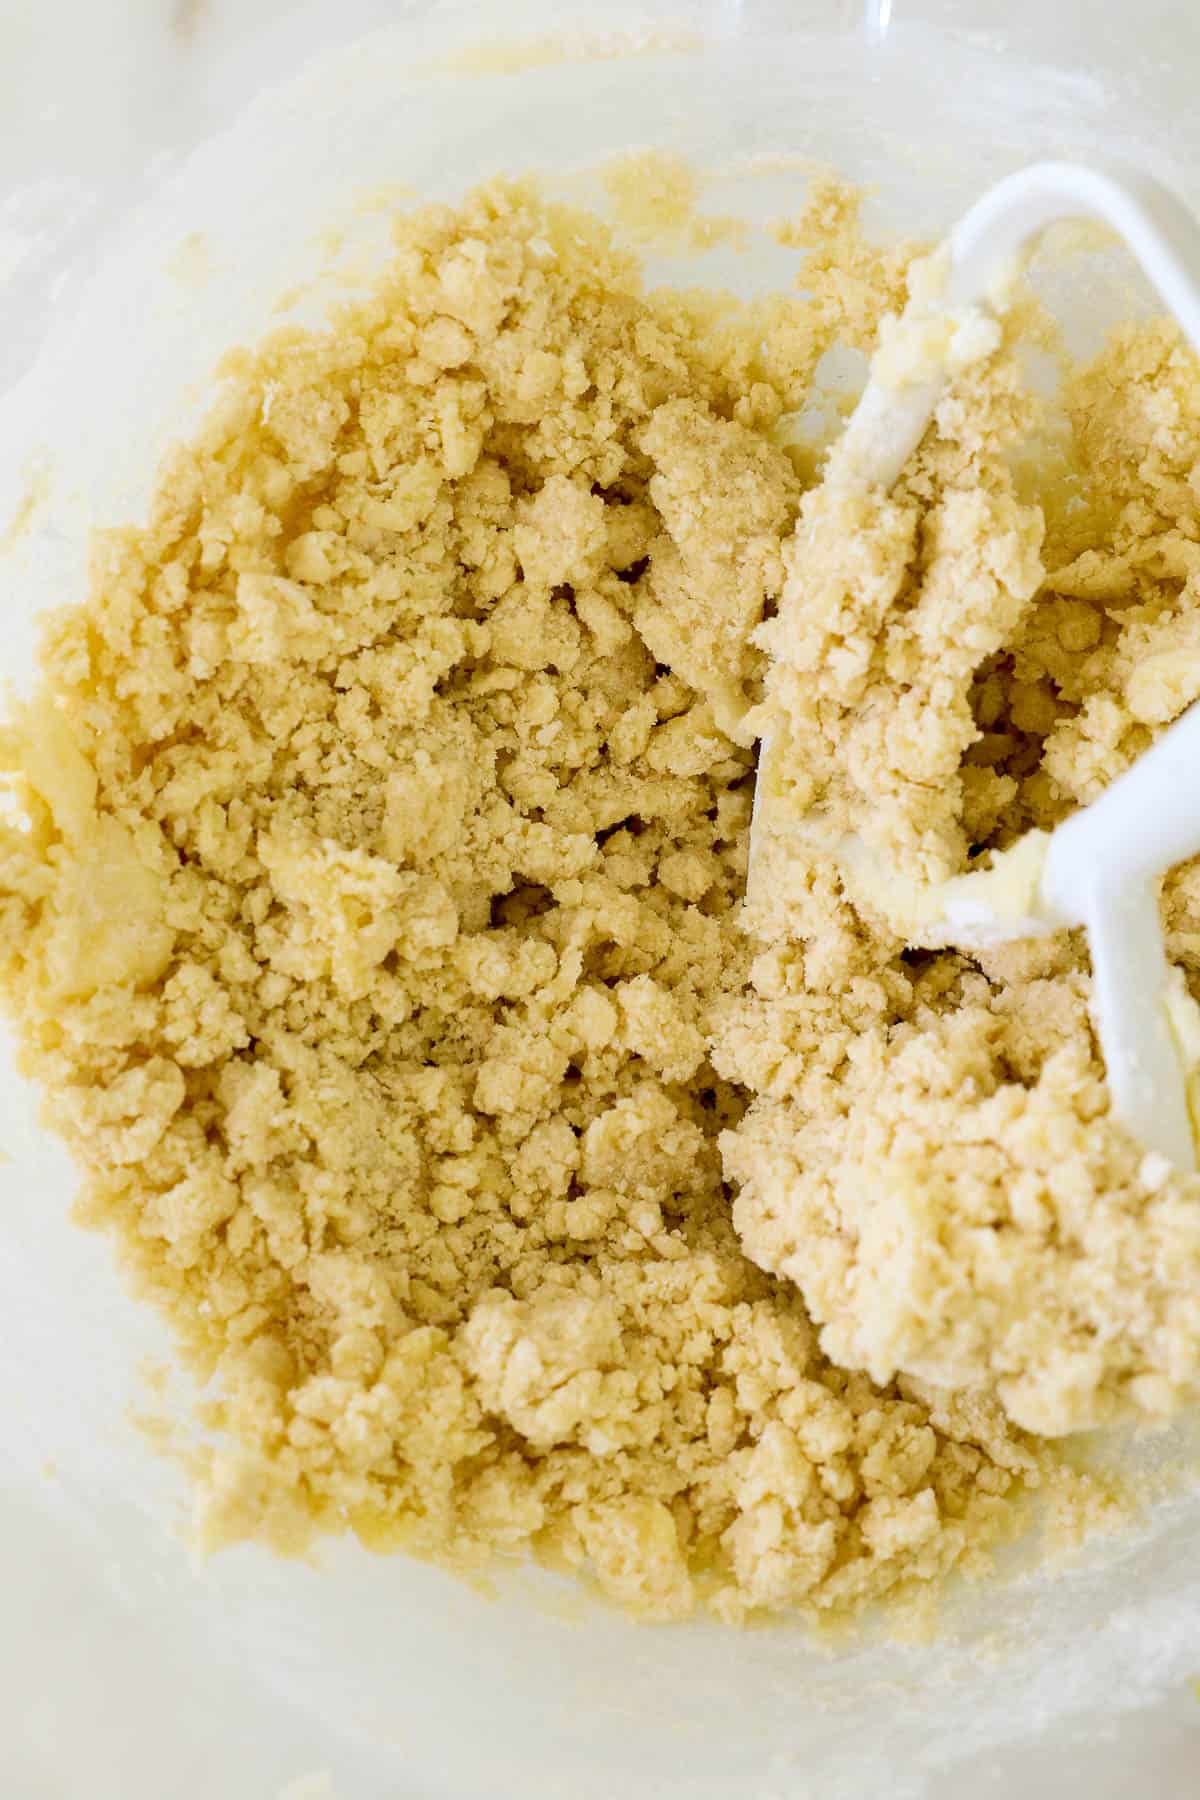 A crumbly cookie dough comes together in the bottom of a mixing bowl.